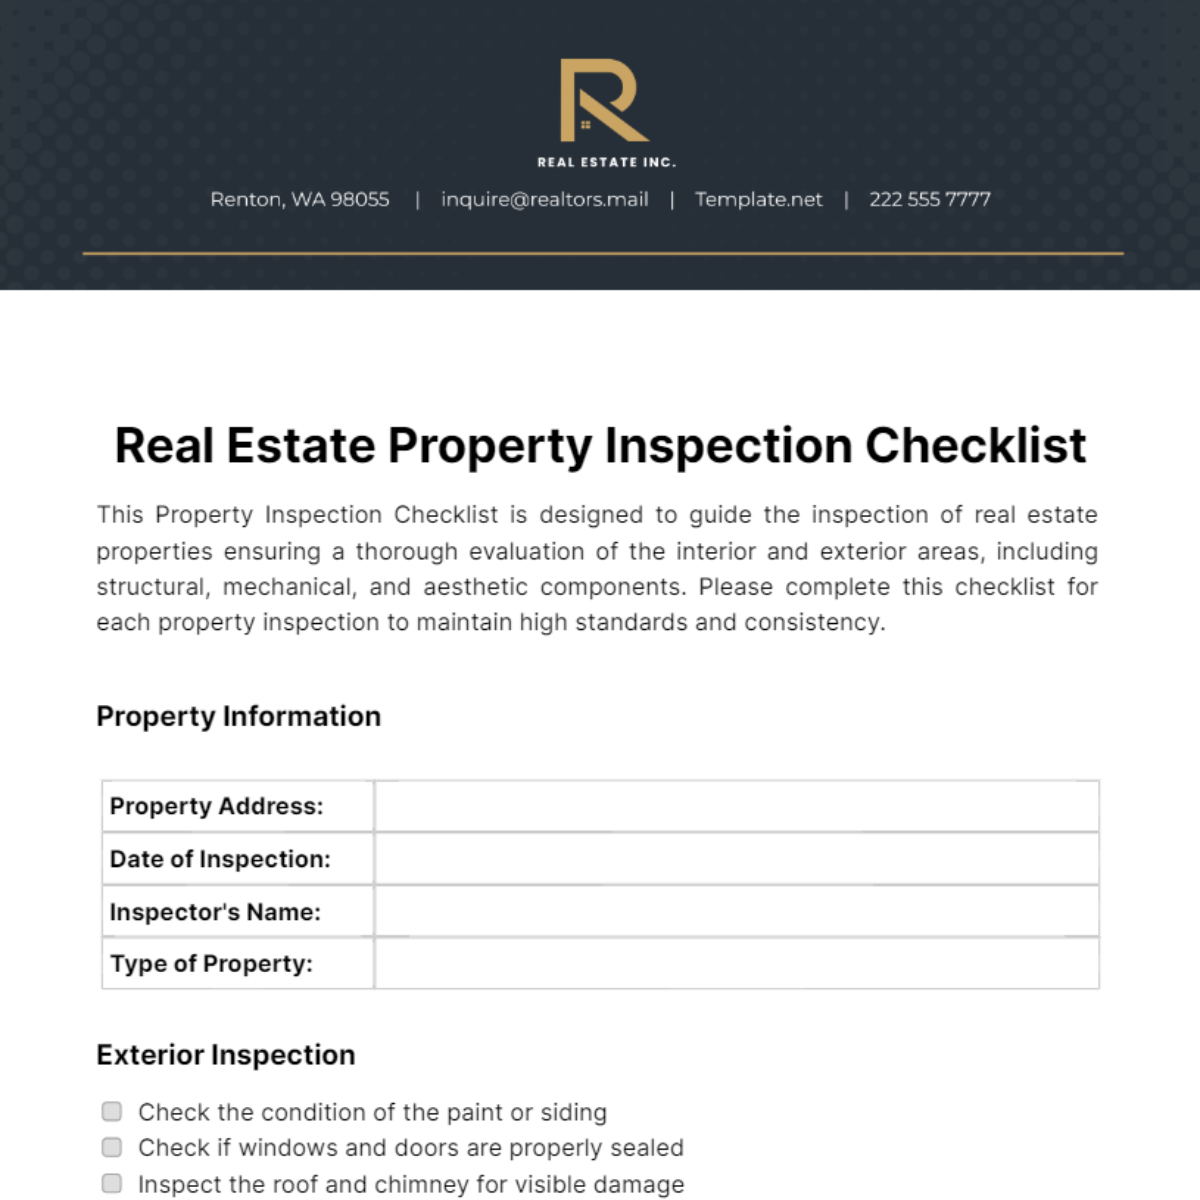 Real Estate Property Inspection Checklist Template